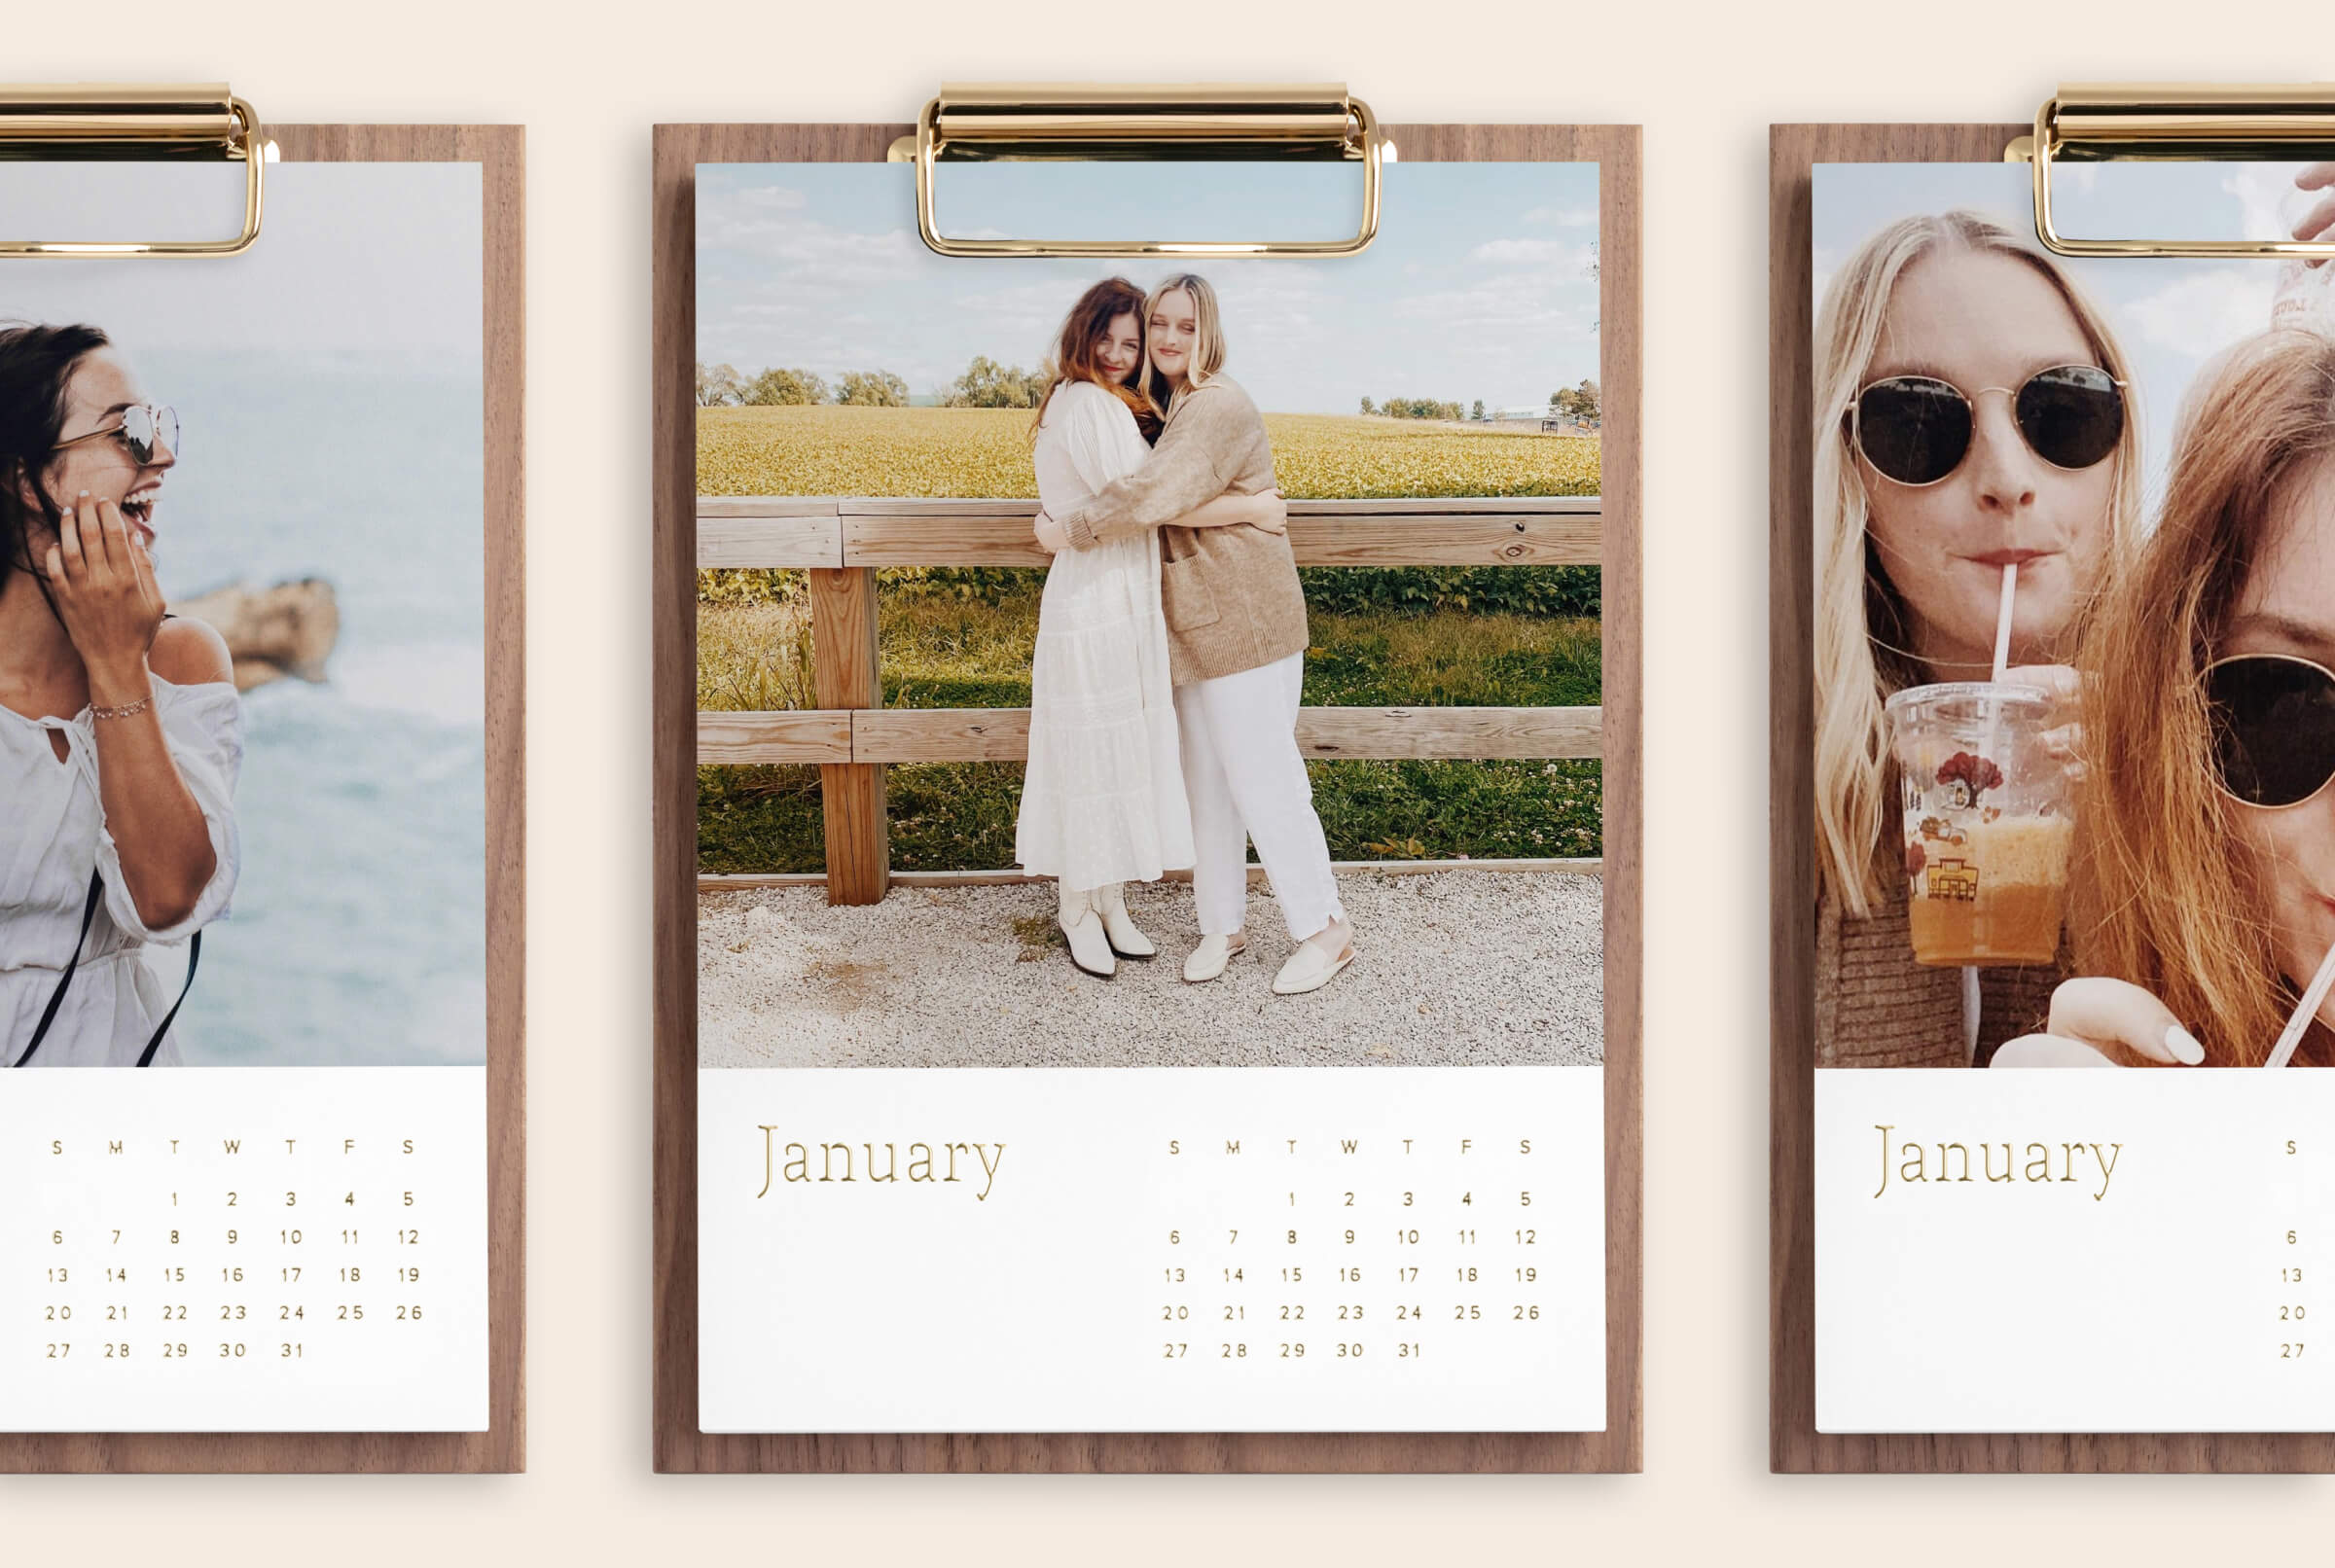 Three monthly photo calendars picturing friends